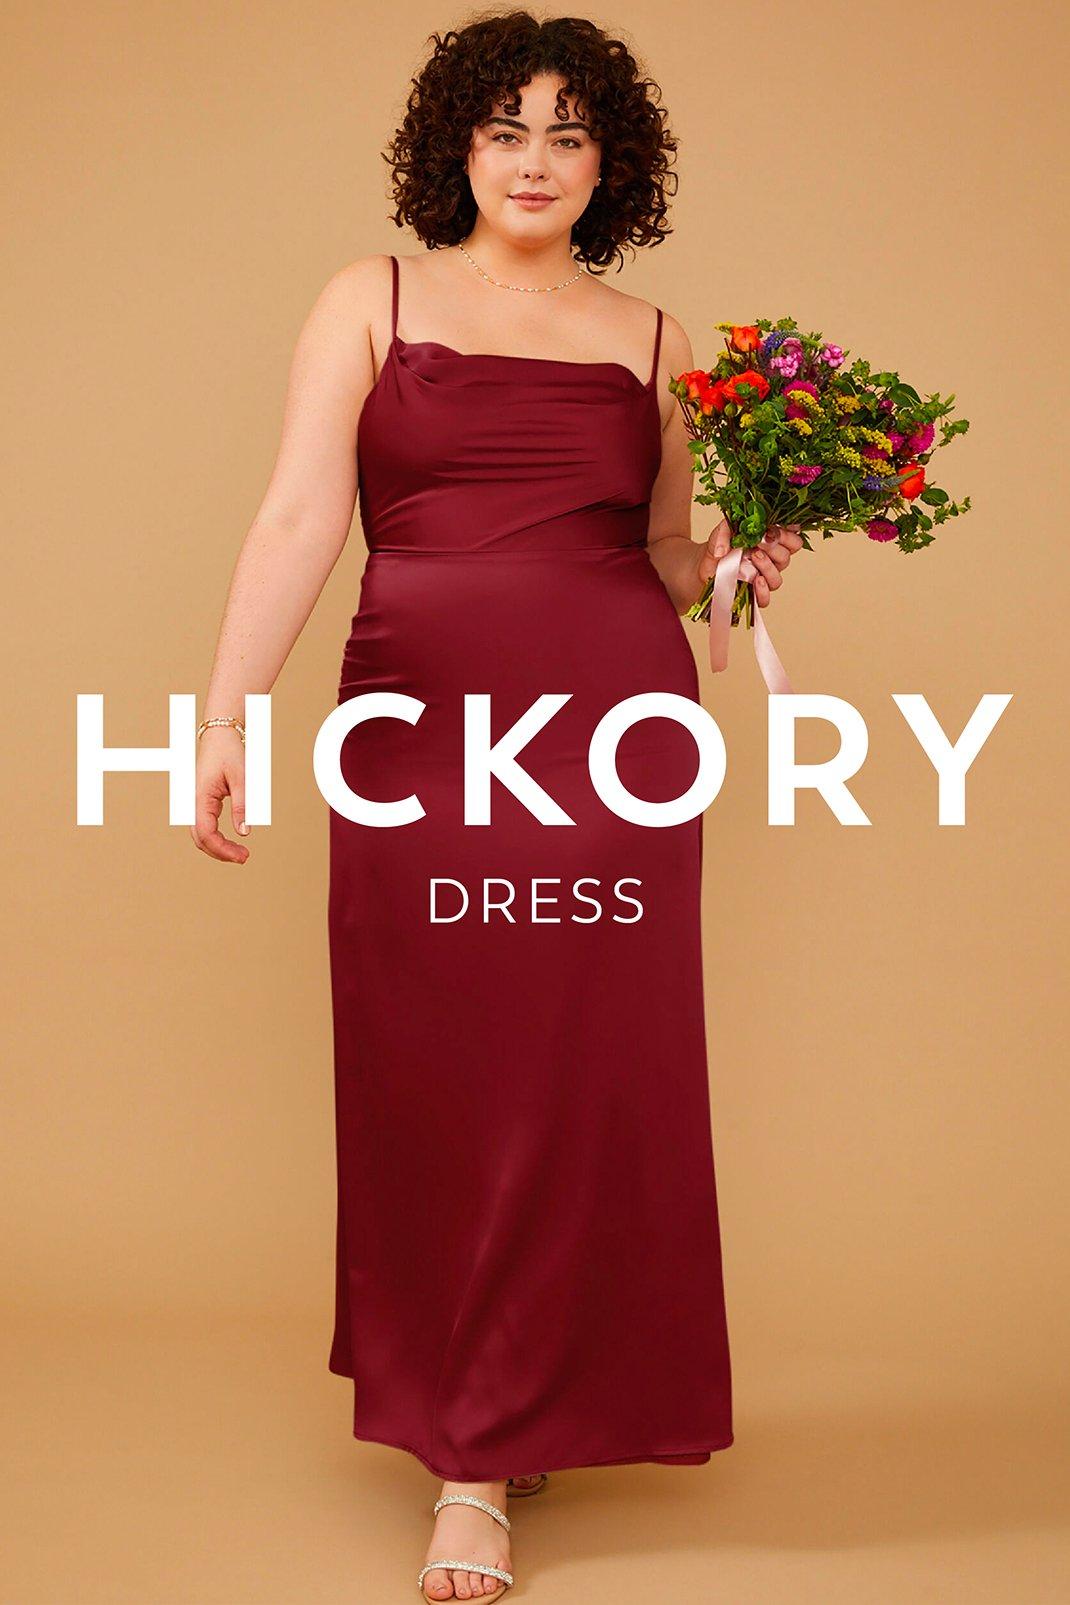 Vow'd Weddings Hickory Dress in Merlot Red